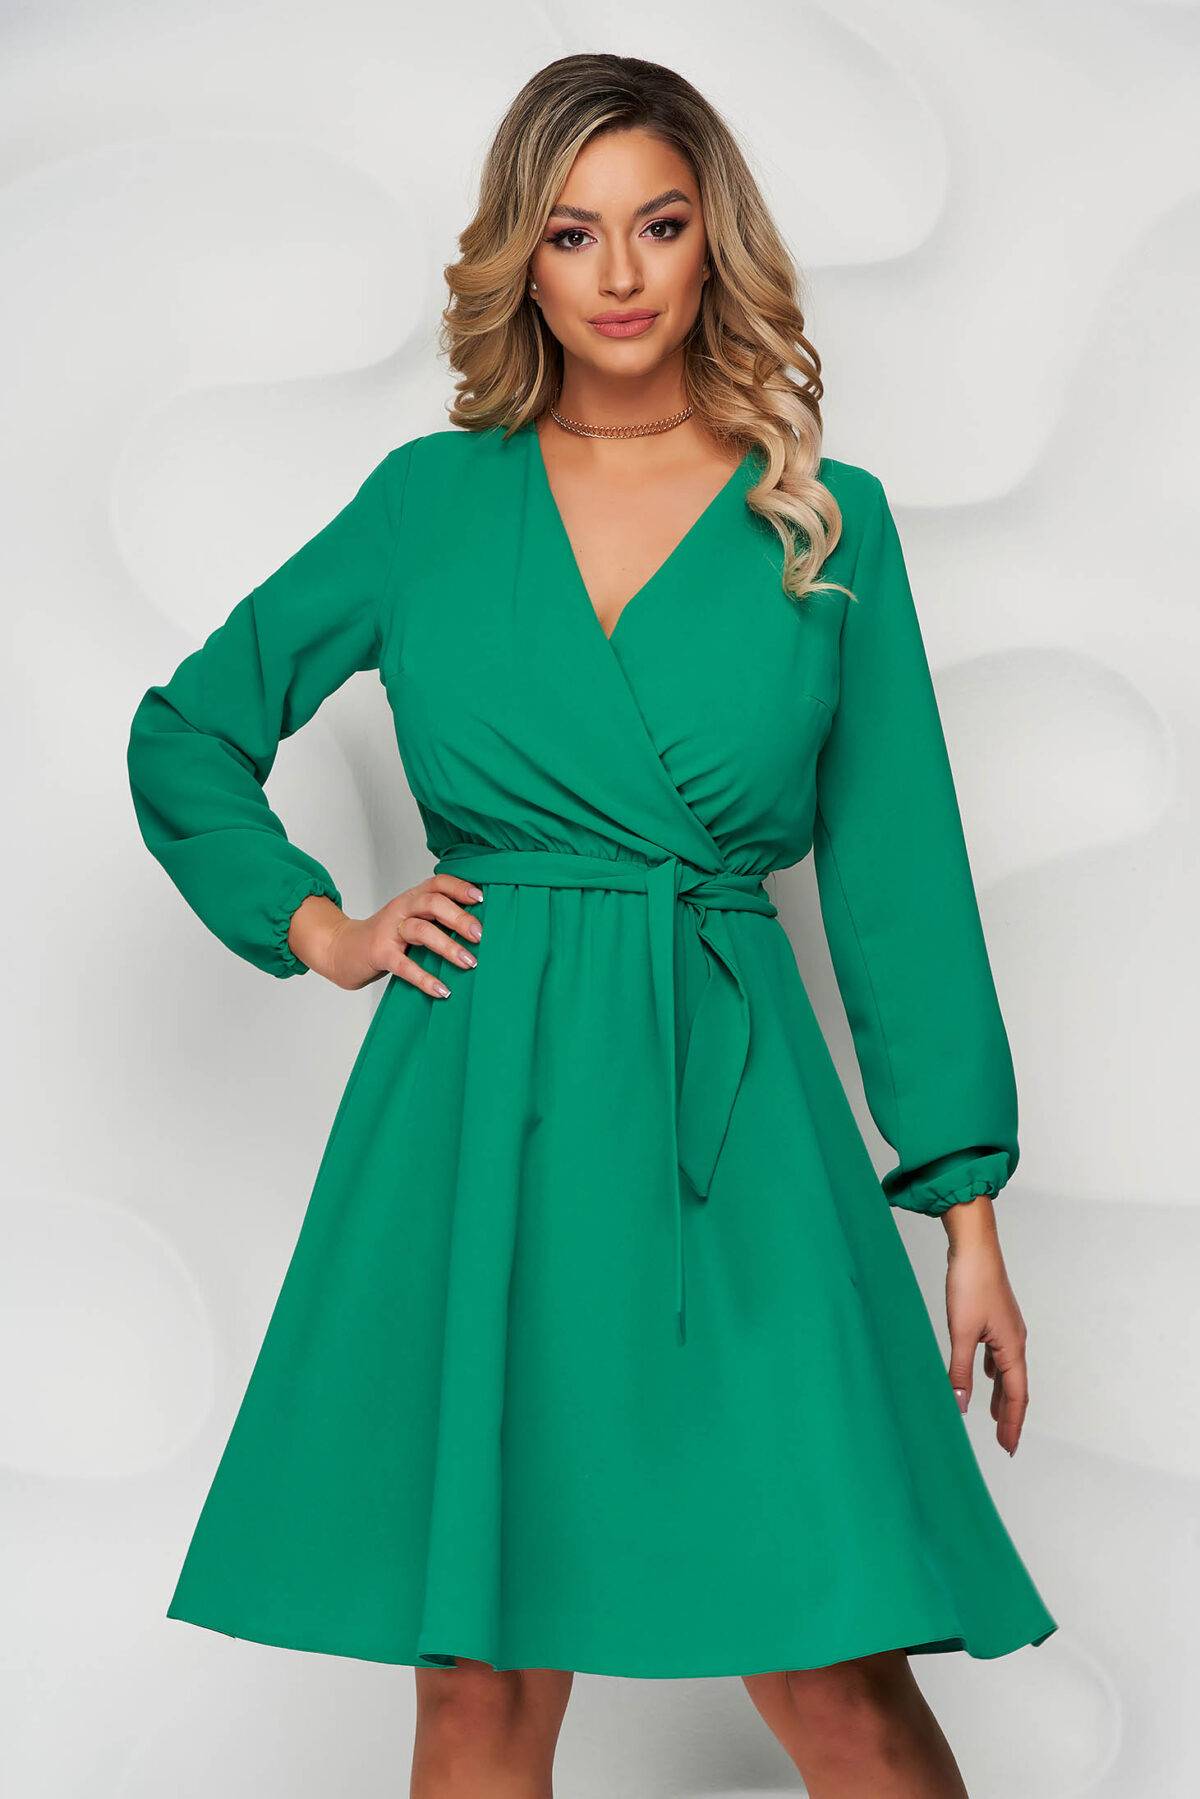 Green Dress Midi Cloche With Elastic Waist Wrap Over Front With Inside Lining